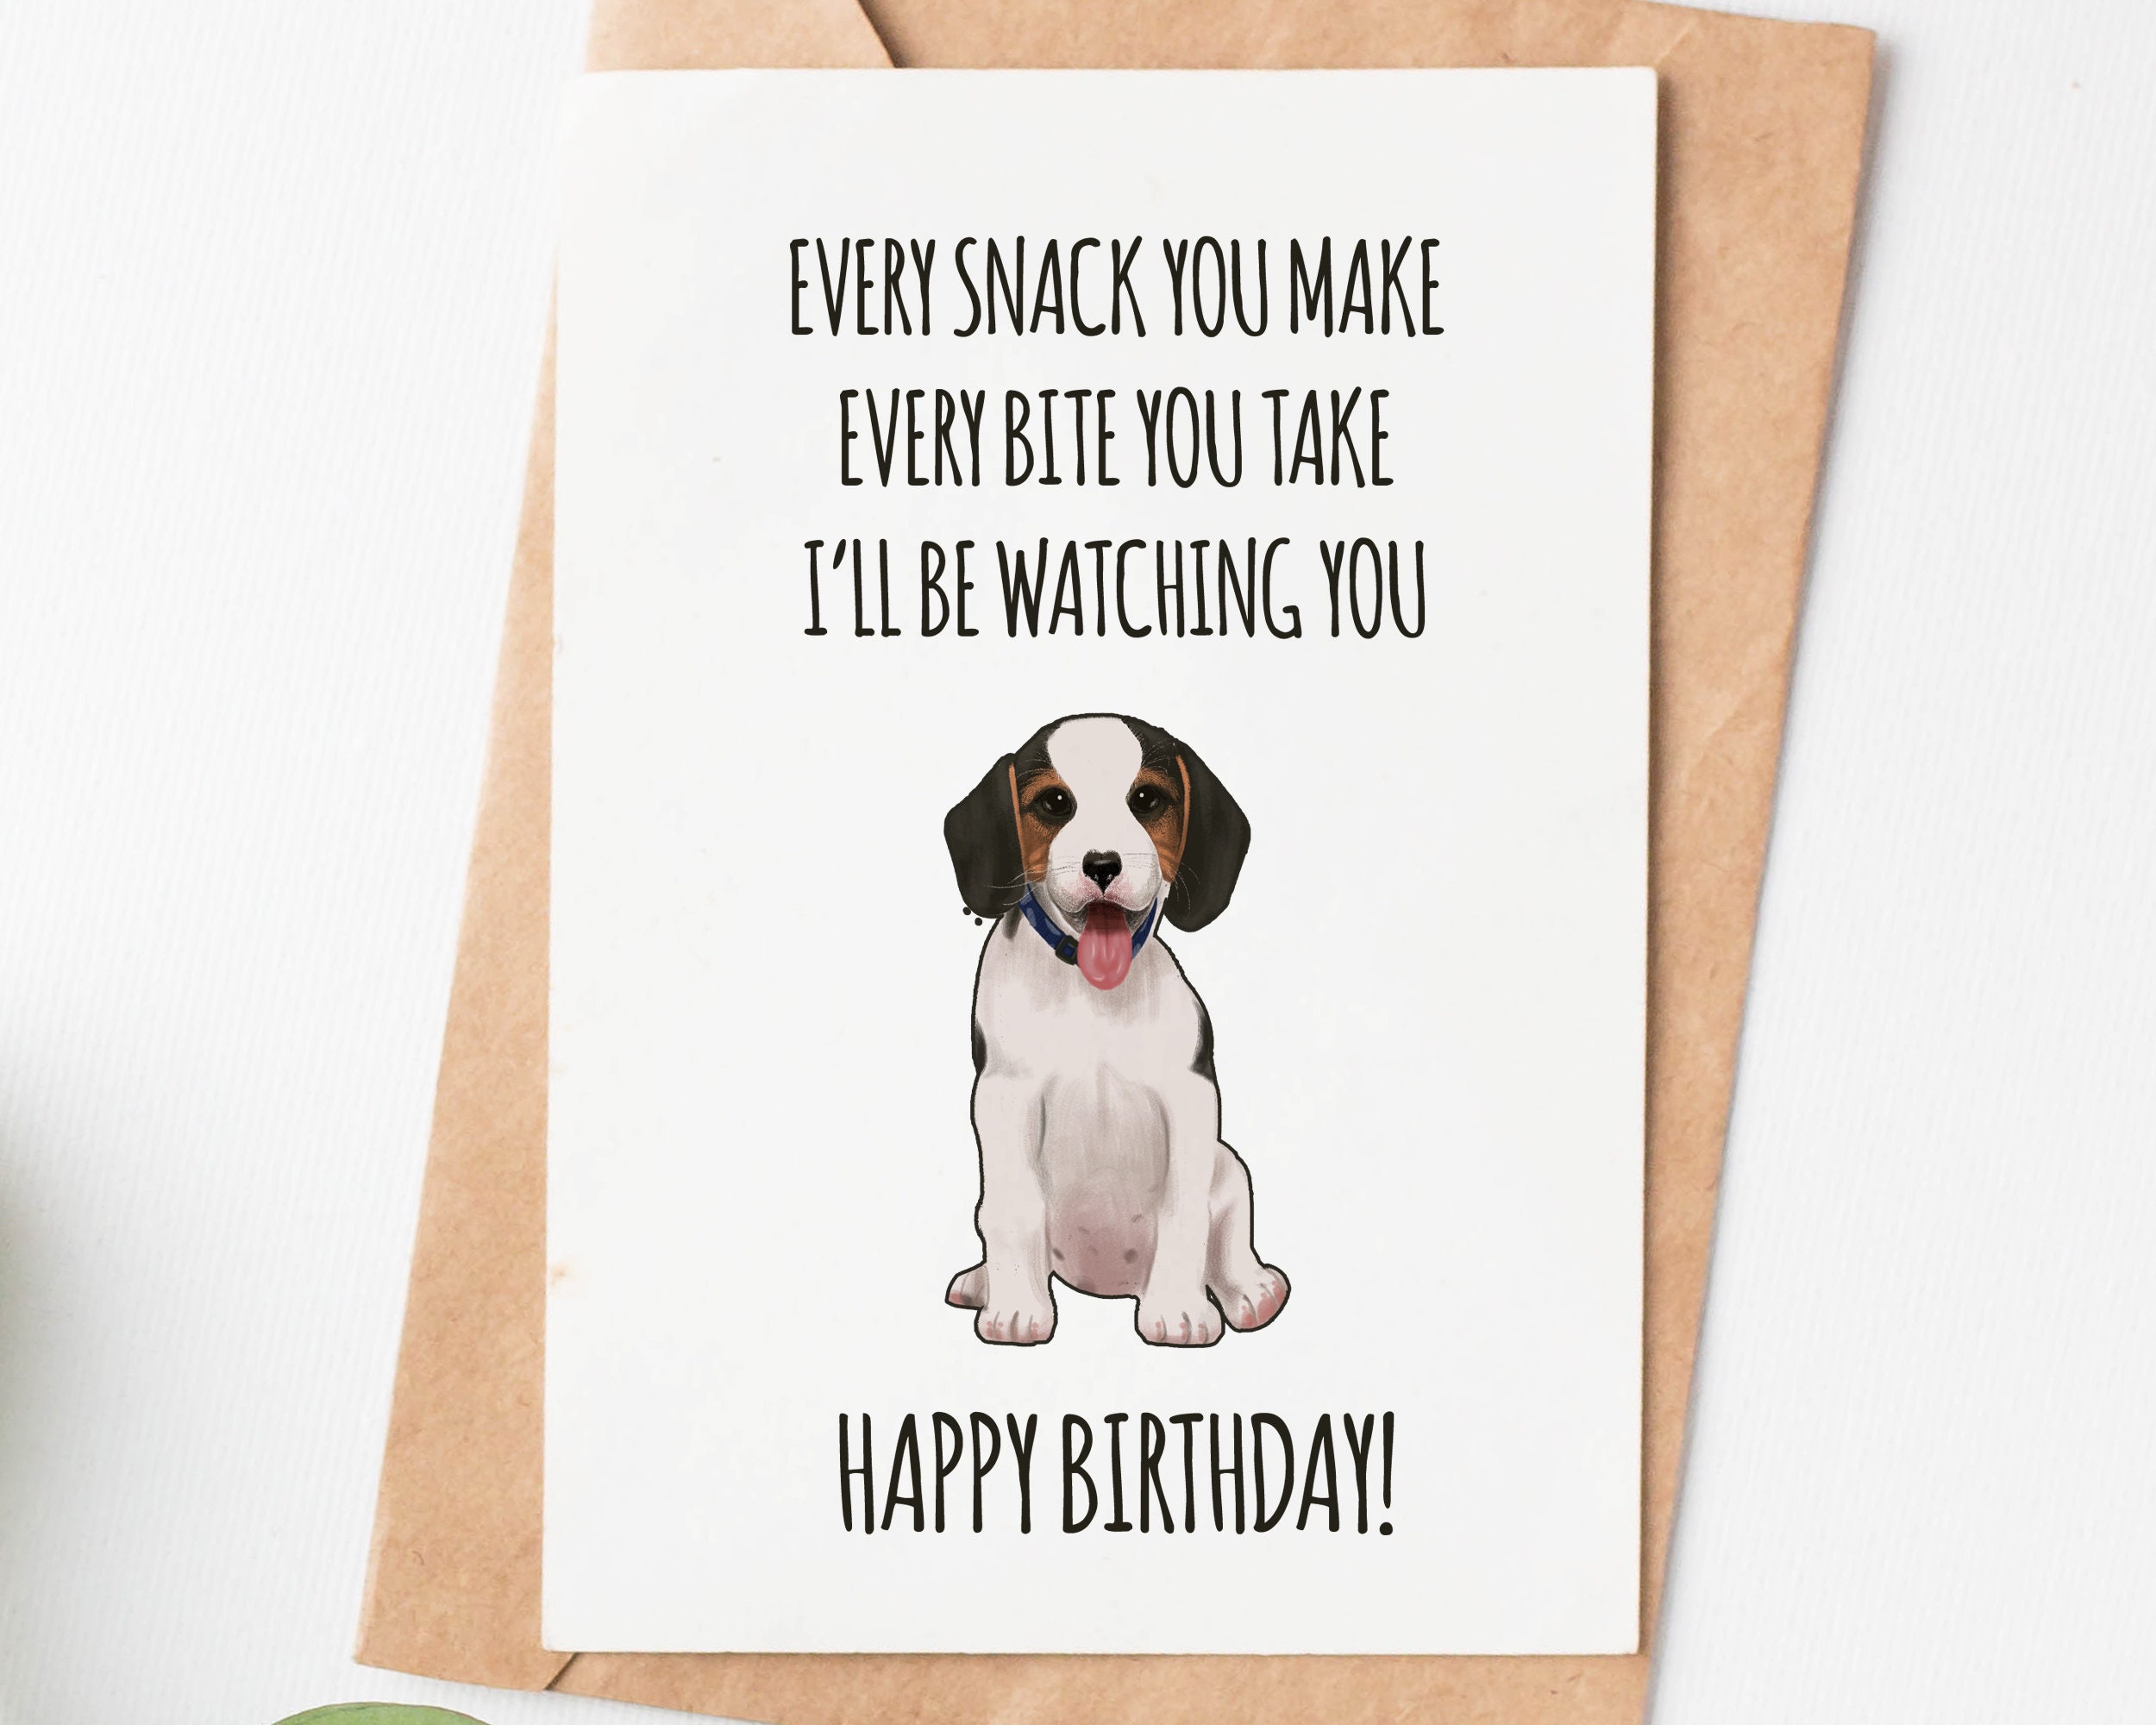 Mum Birthday Card Novelty Cards Family Pet Cards Fun PC274 Funny Cards from The Dog Thanks Mum Dog Cards Birthday Cards from The Dog 